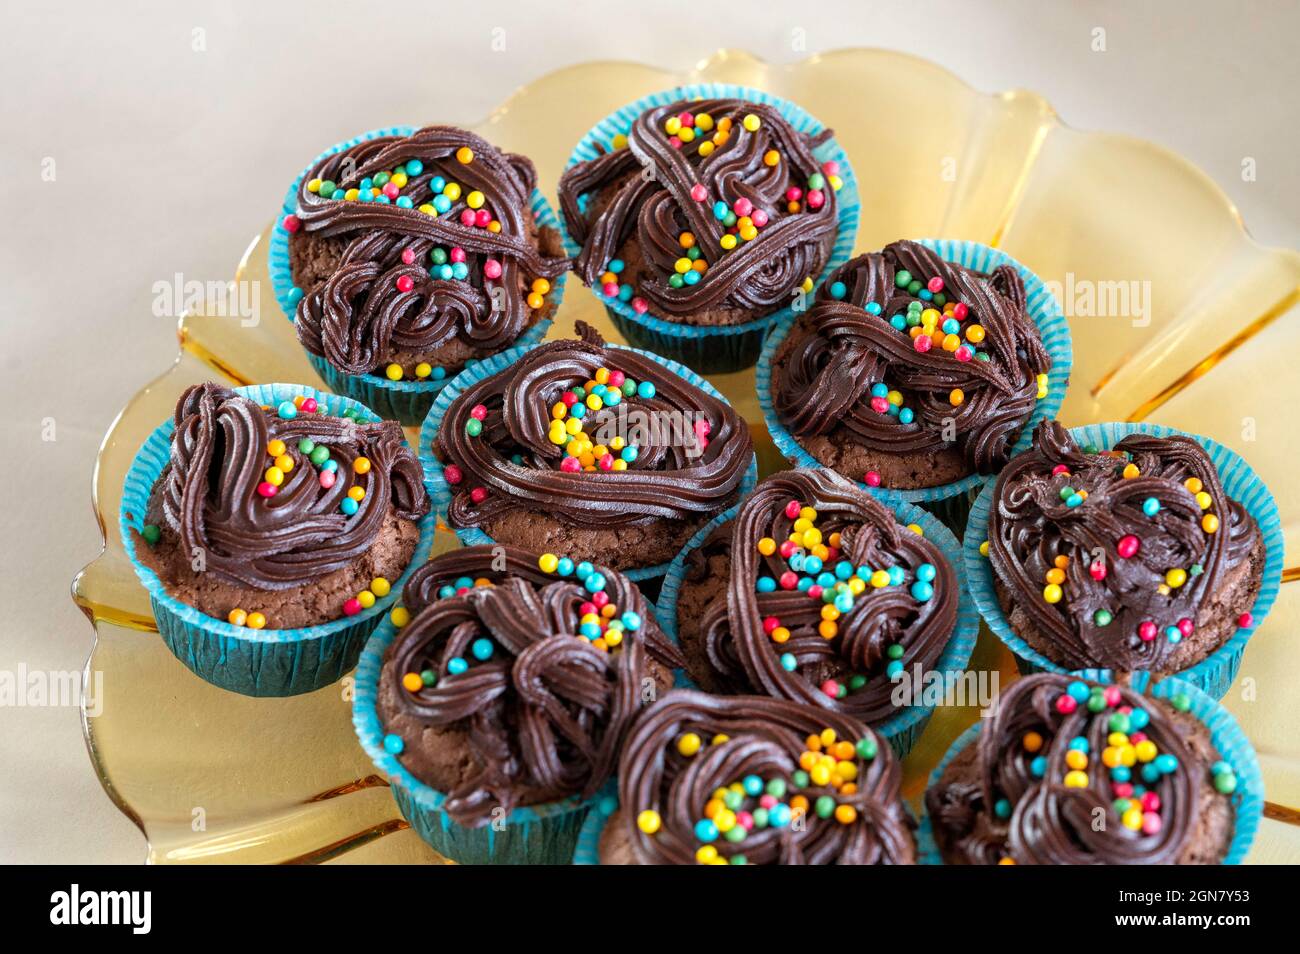 Chocolate cupcakes on a glass plate Stock Photo